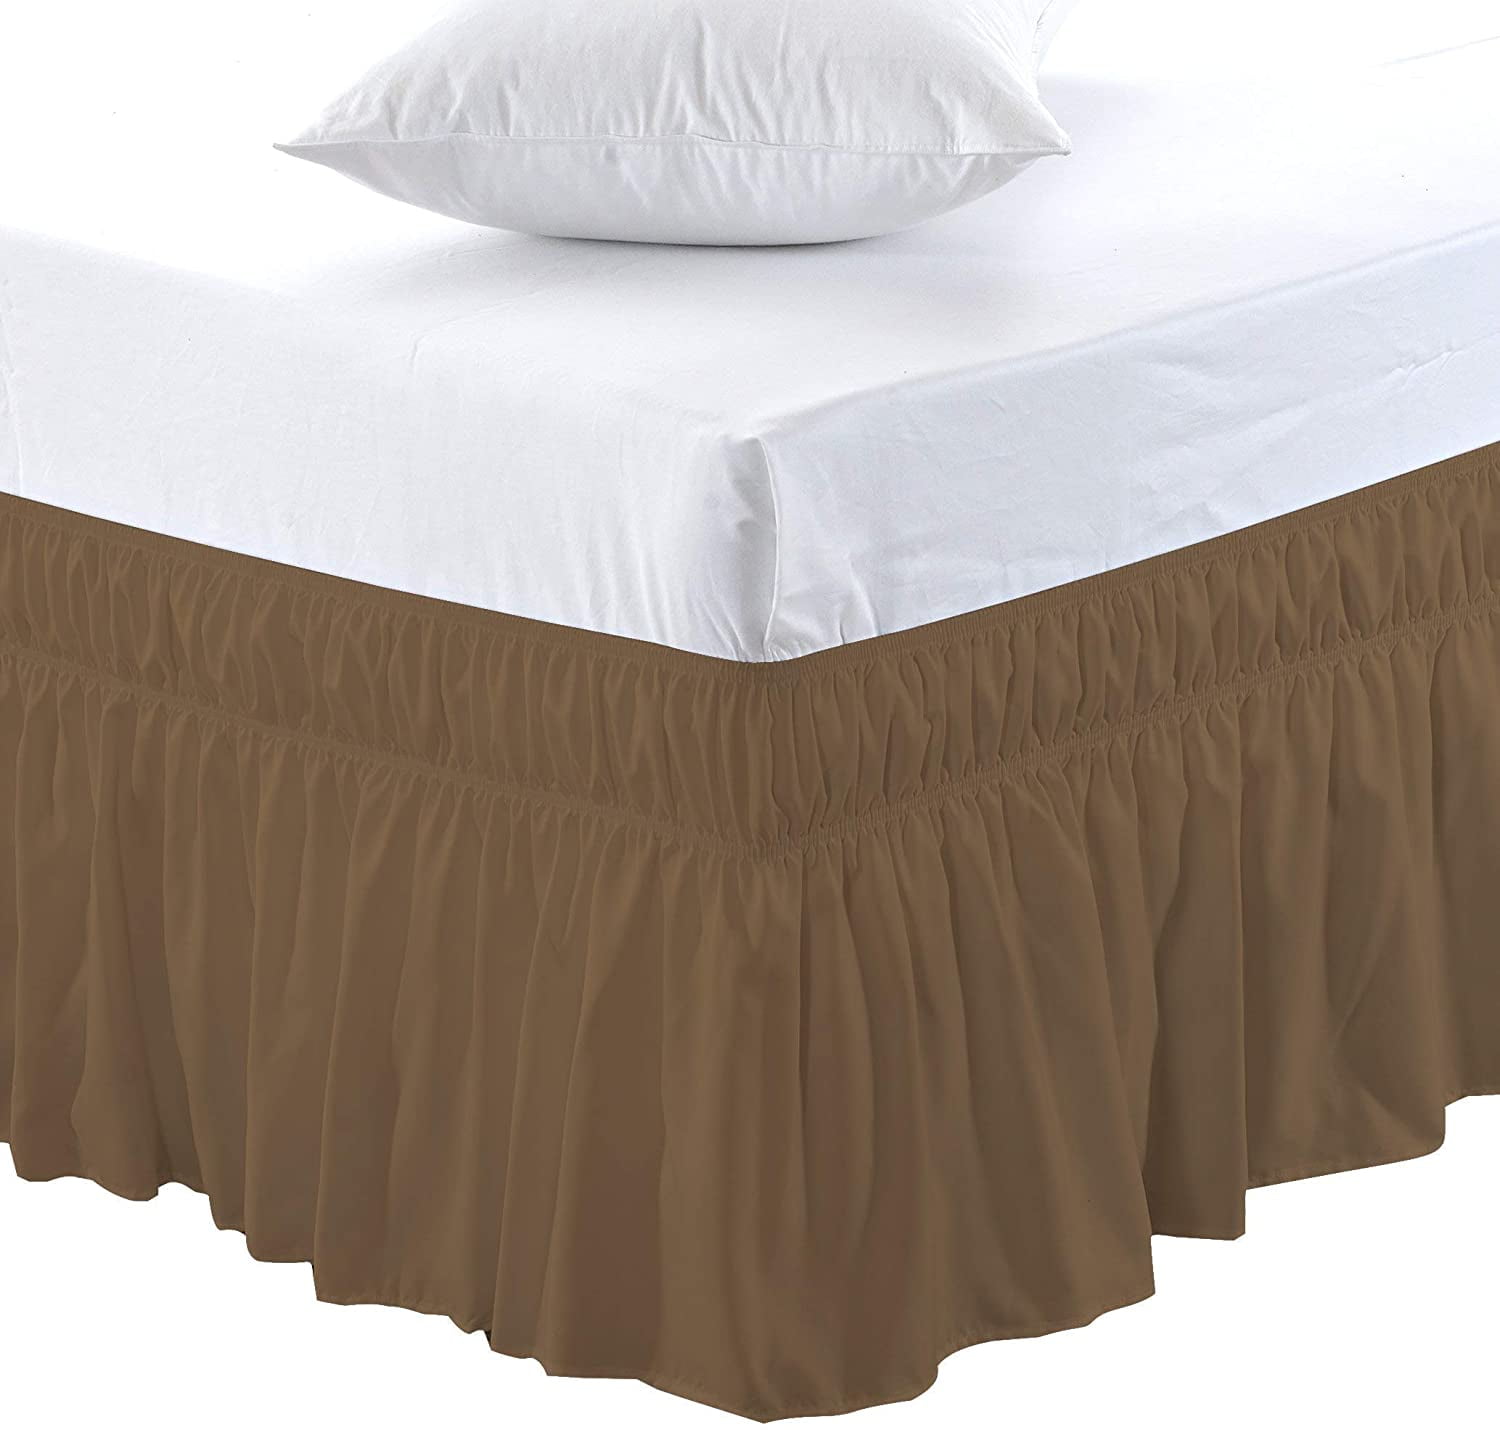 Dust Ruffle Bed Skirt/Bed Cover 20" drop 800 TC Egyptian Cotton ALL SIZE &COLOR 